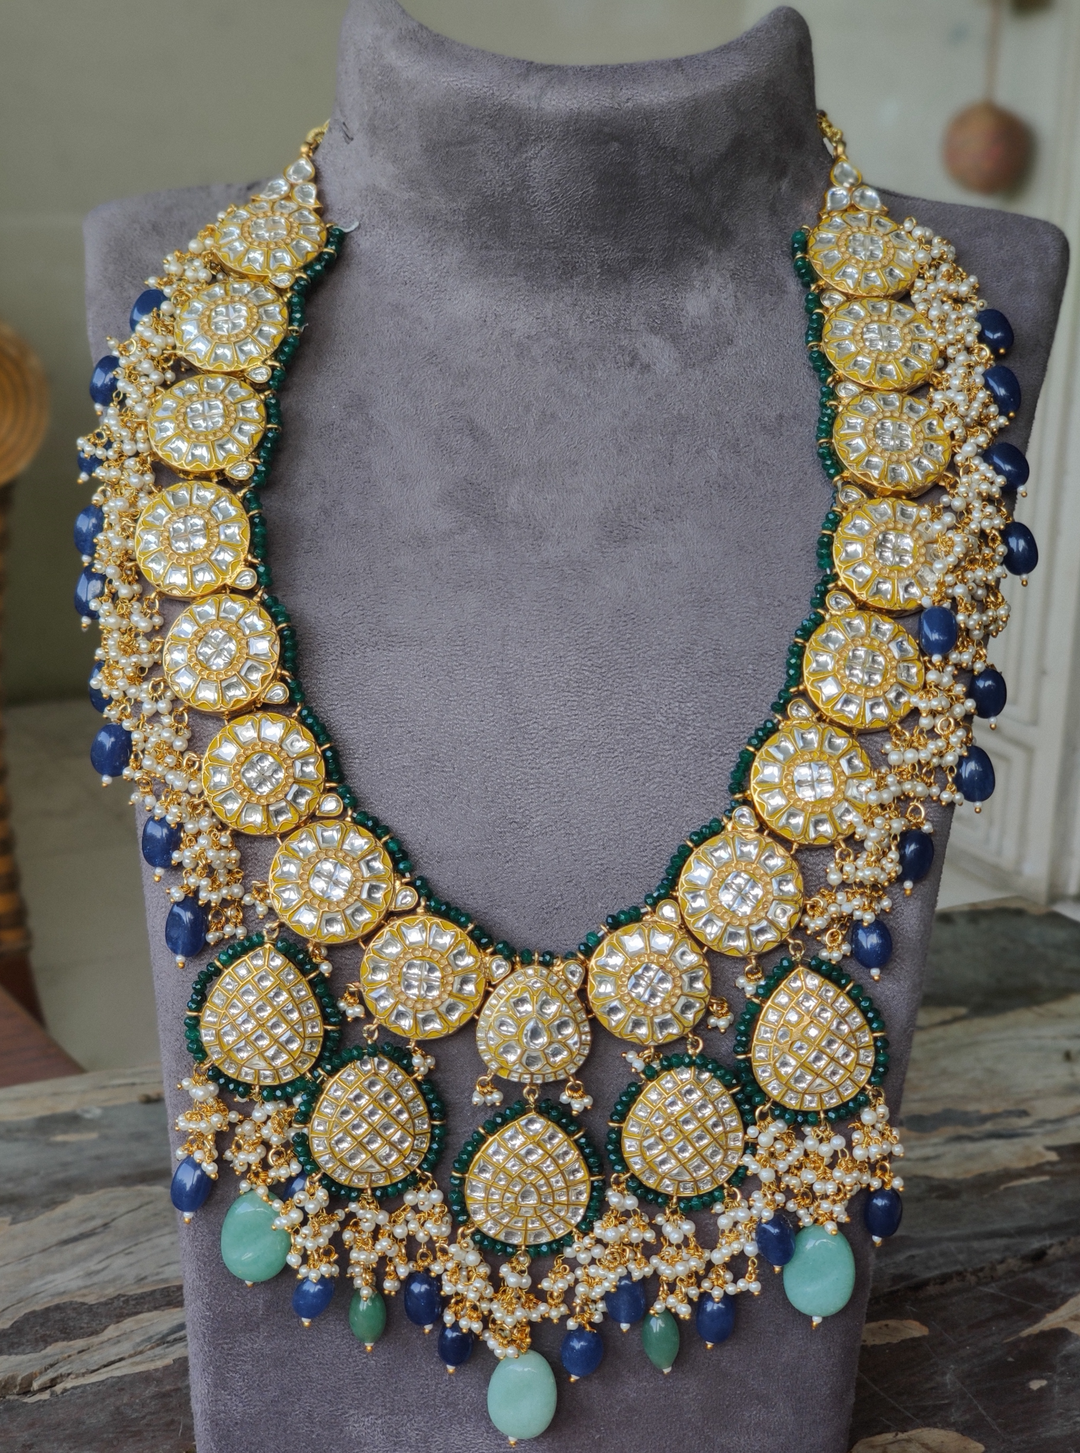 Long Necklace In Blue And Green Beads Loaded With Pearls-Accessories-Glamourental